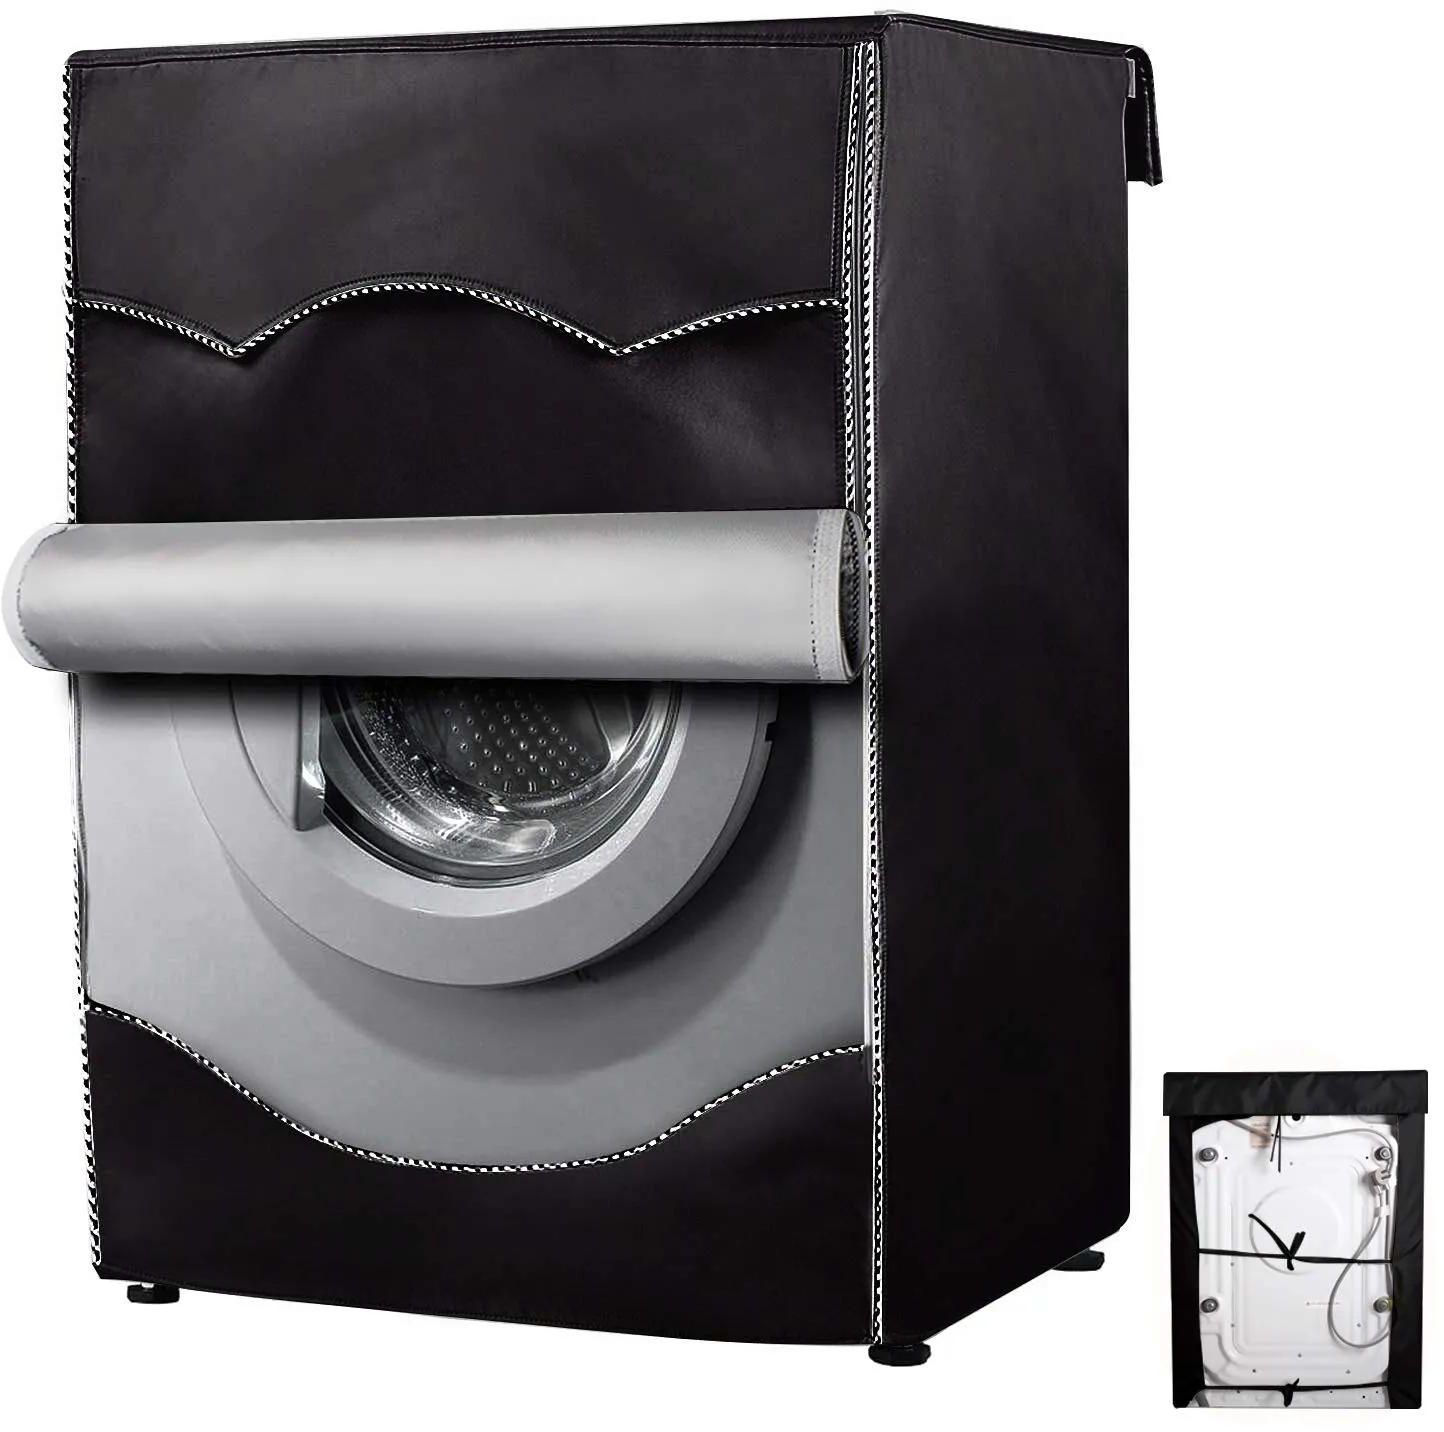 Front Load Washing Machine Cover Waterproof/Dustproof -Fits Upto 10kg